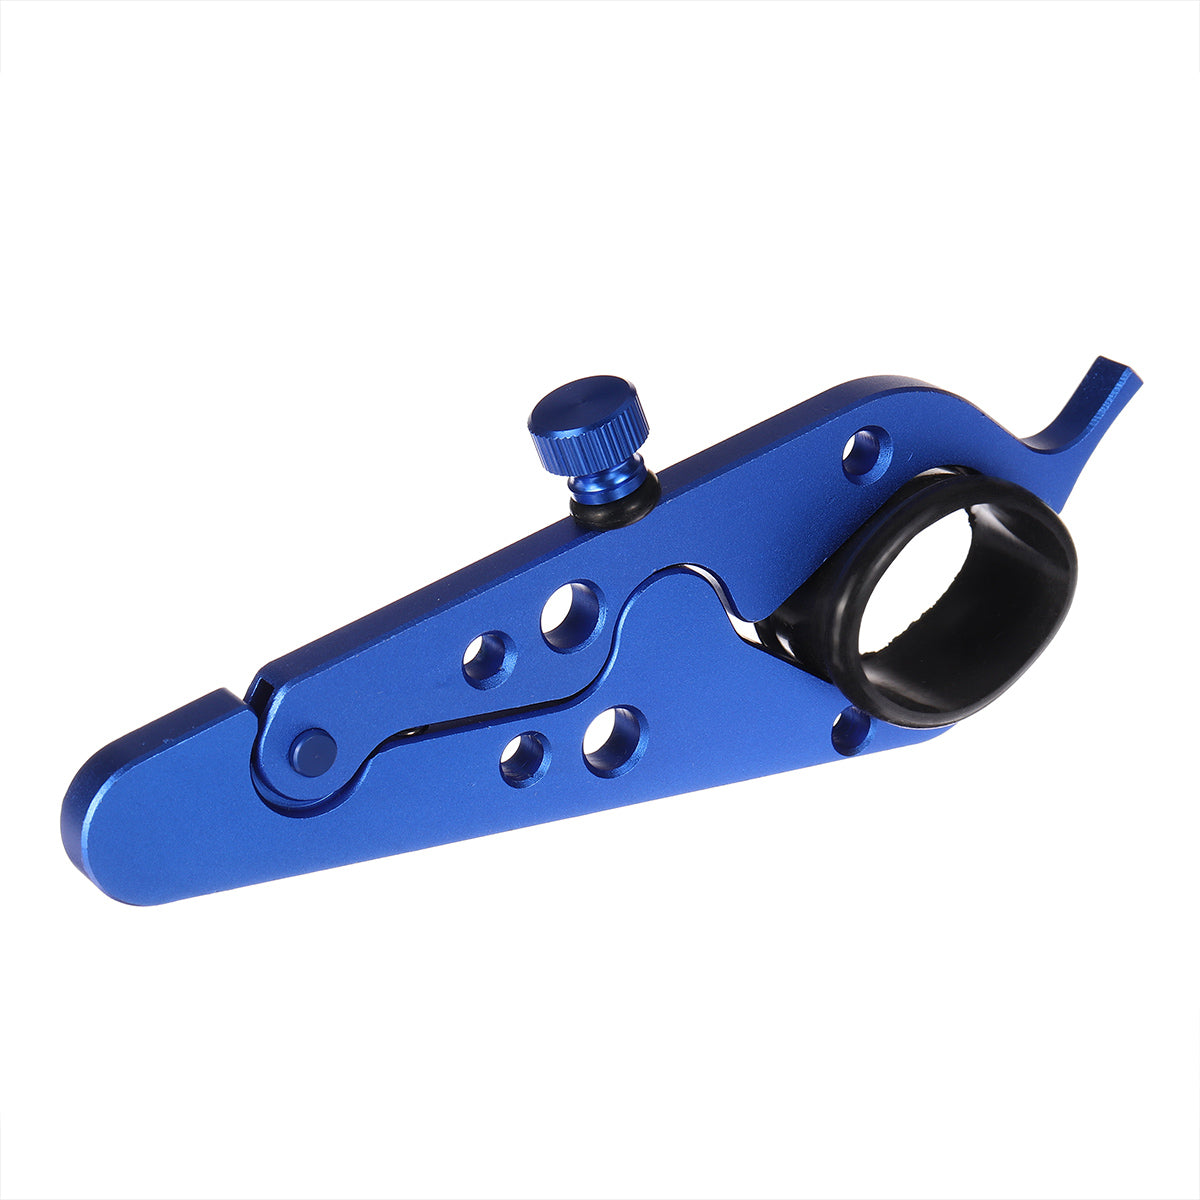 Royal Blue Universal Motorcycle Cruise Control Throttle Lock Assist System With Rubber Ring